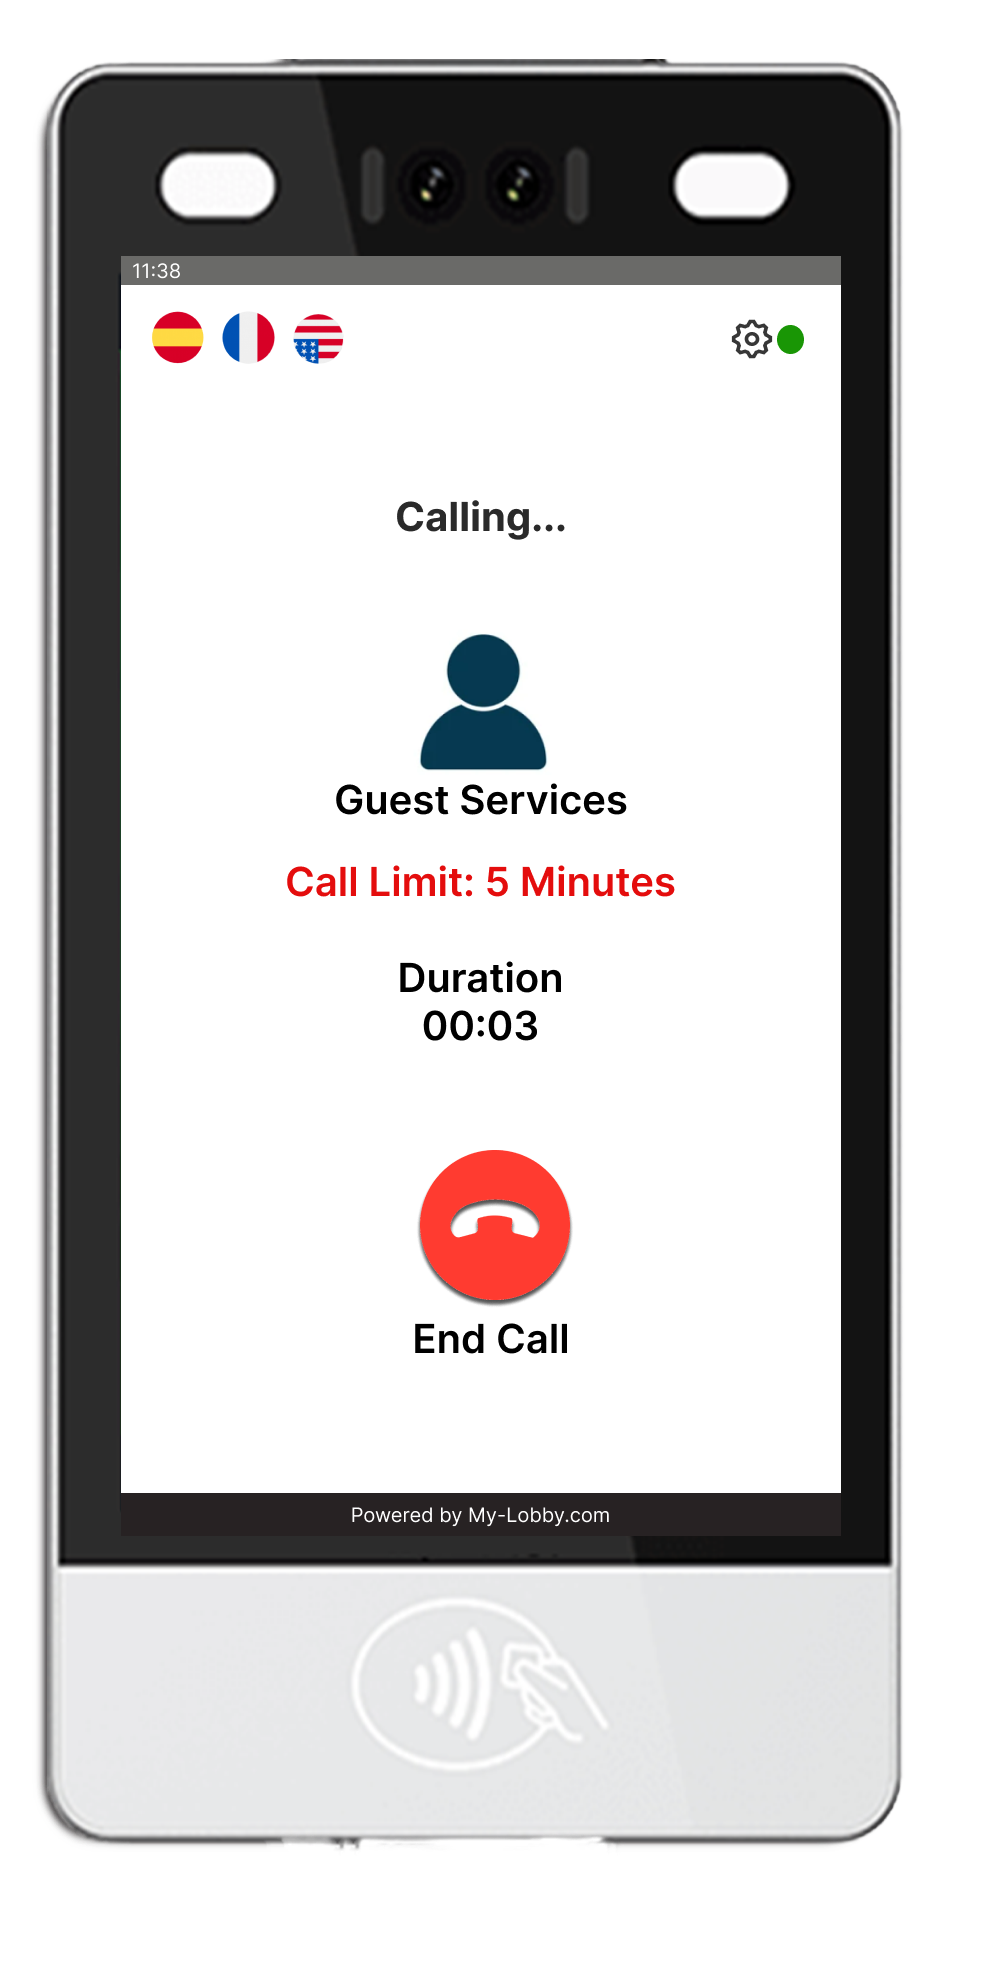 Call Button: Enable direct calls from the kiosk, streamlining communication and enhancing visitor experience. Improve efficiency, security, and operational cost-effectiveness.